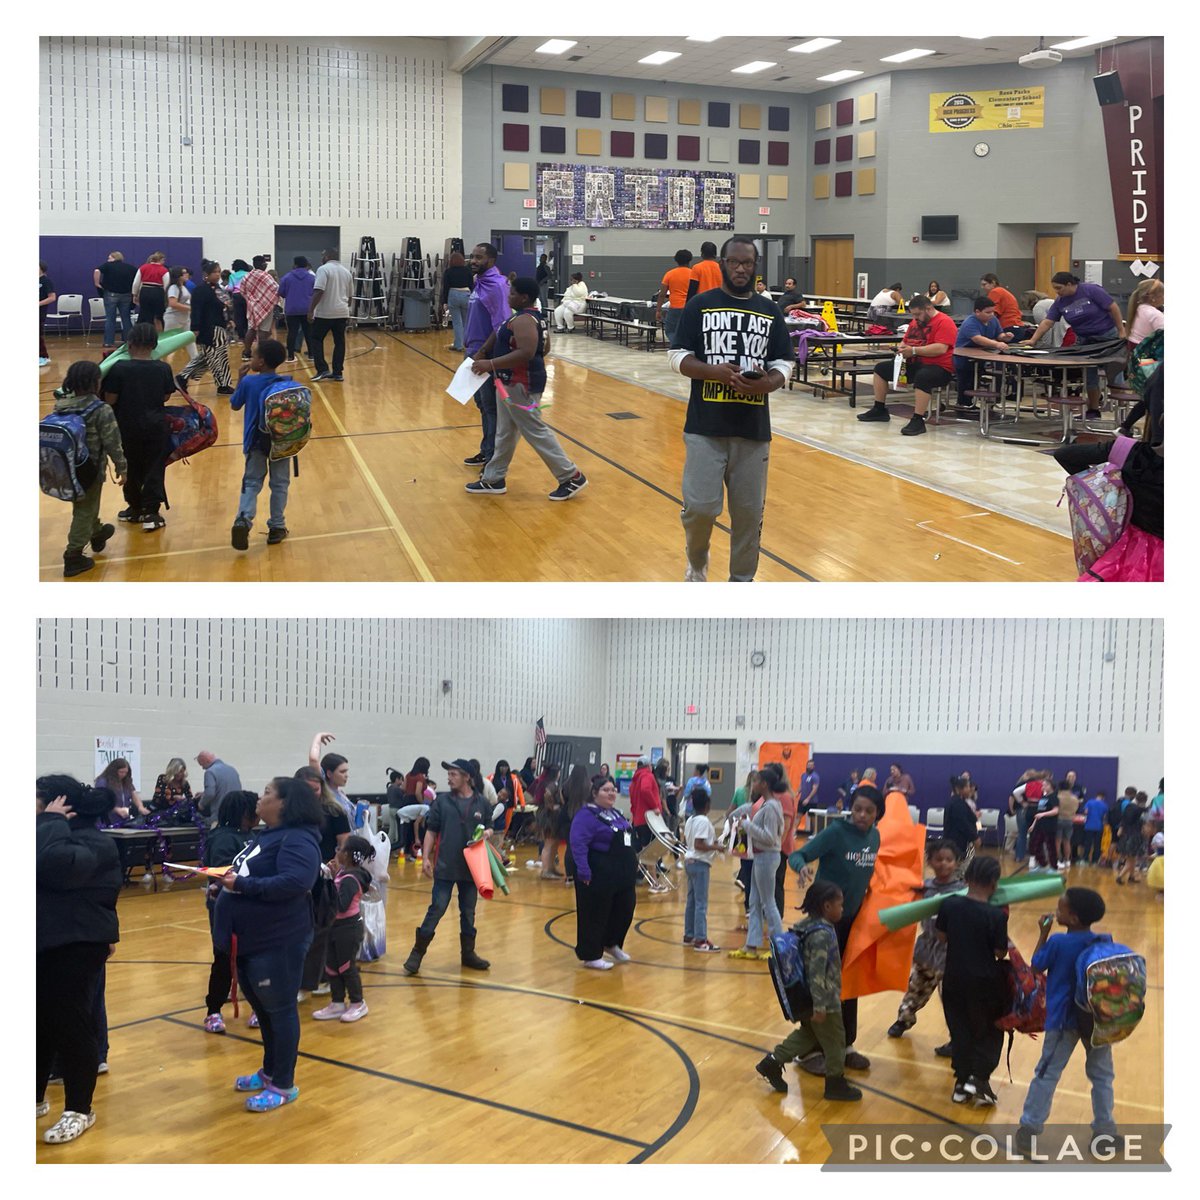 Awesome time during the Fall Festival with our family and friends @RosaPTweets #middierising